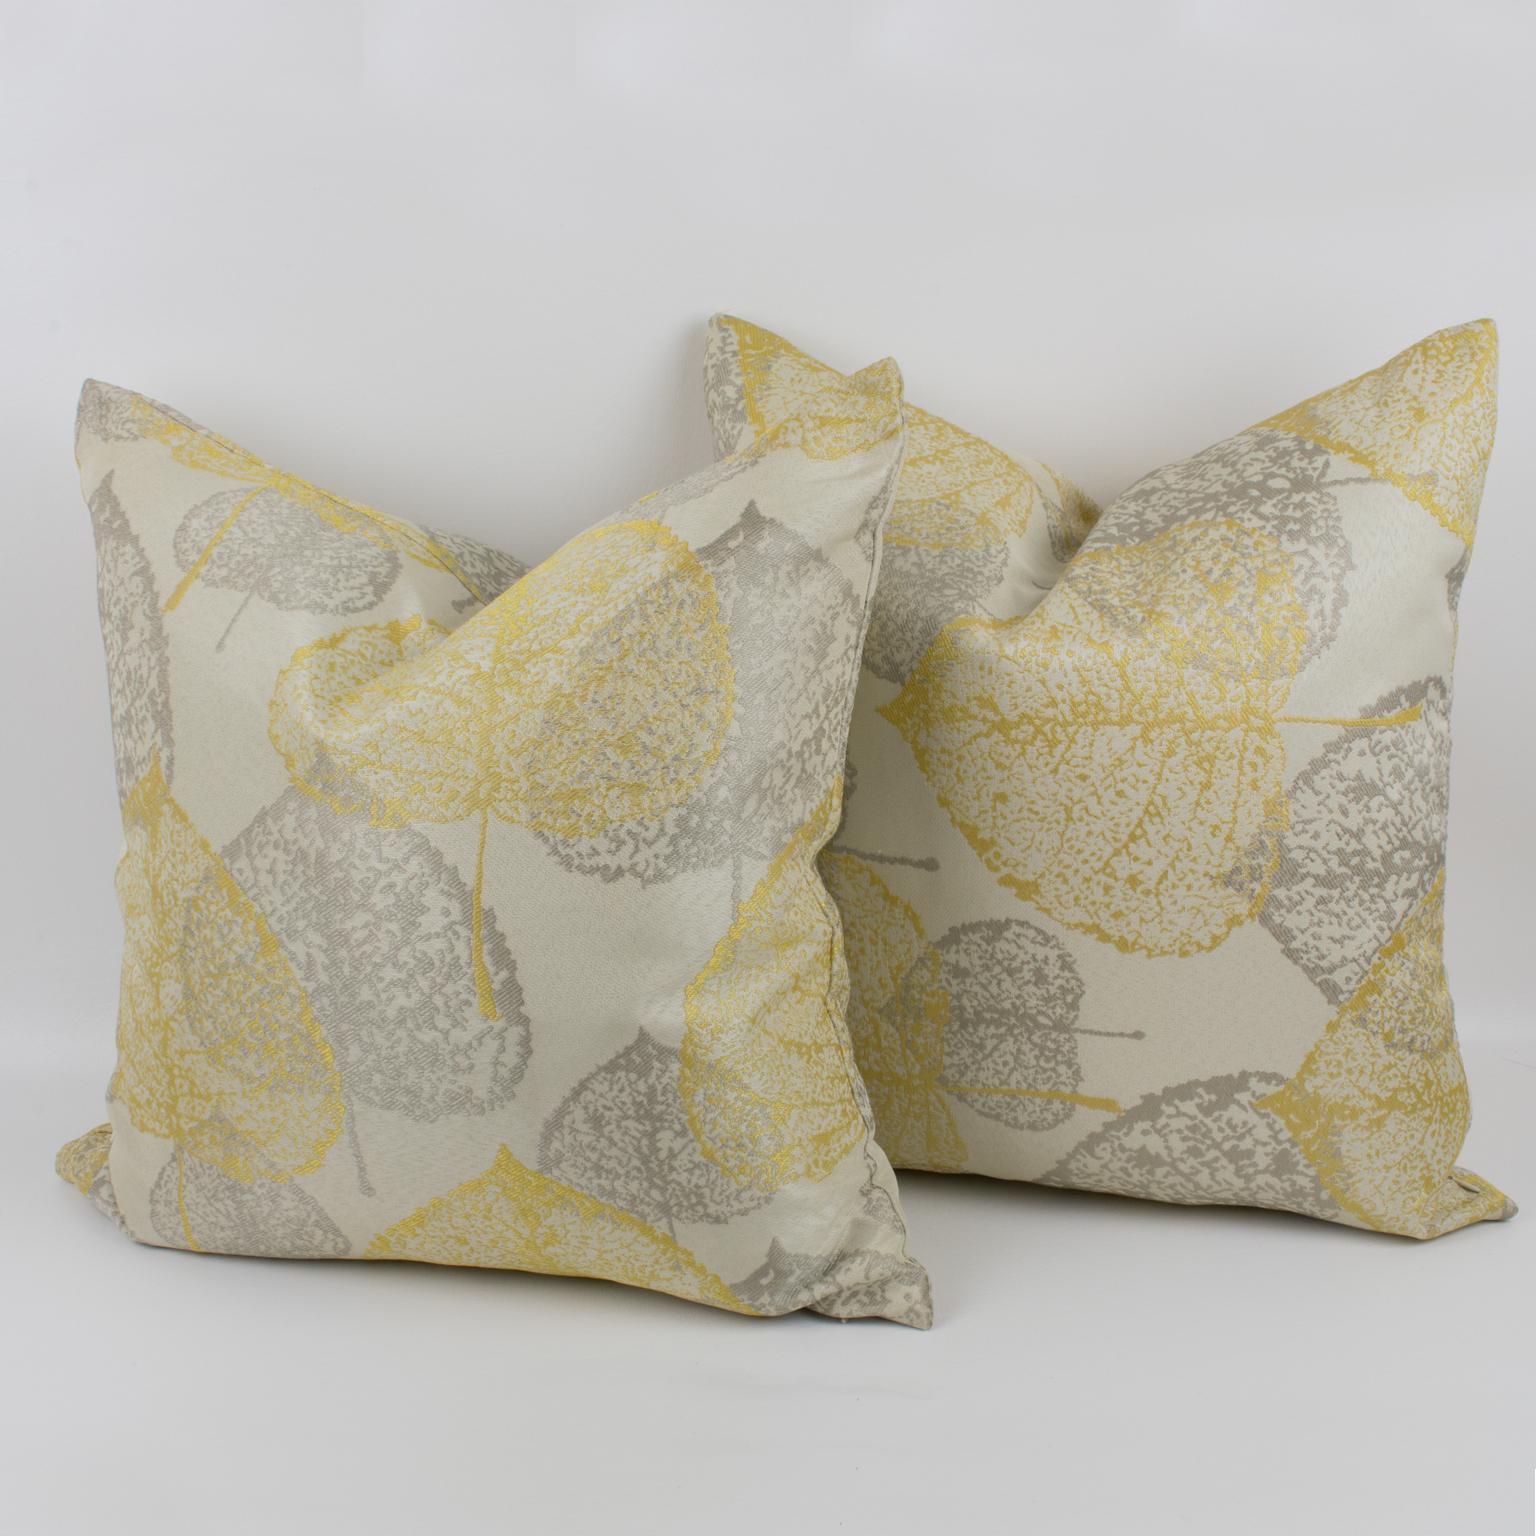 Lovely set of damask throw pillows. These lumbar pillows are covered with a textured naturalist design in silver-gray and light yellow colors over a silky off-white background. European shape. A zipper encloses an inner feather pillow. An accent for